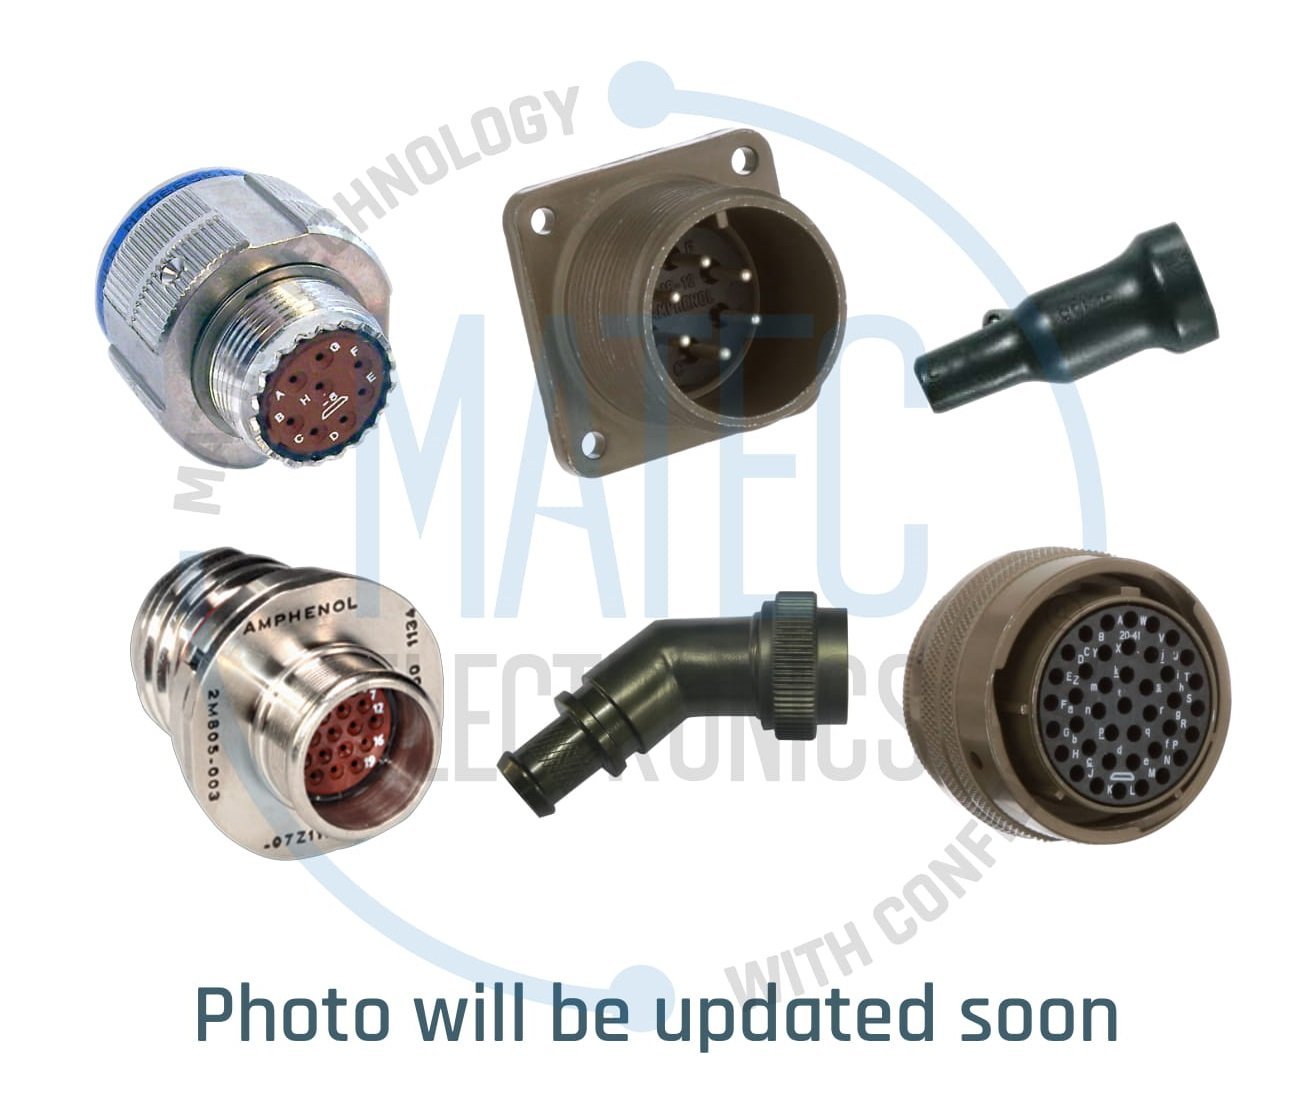 OTHER INDUSTRIAL CONNECTORS